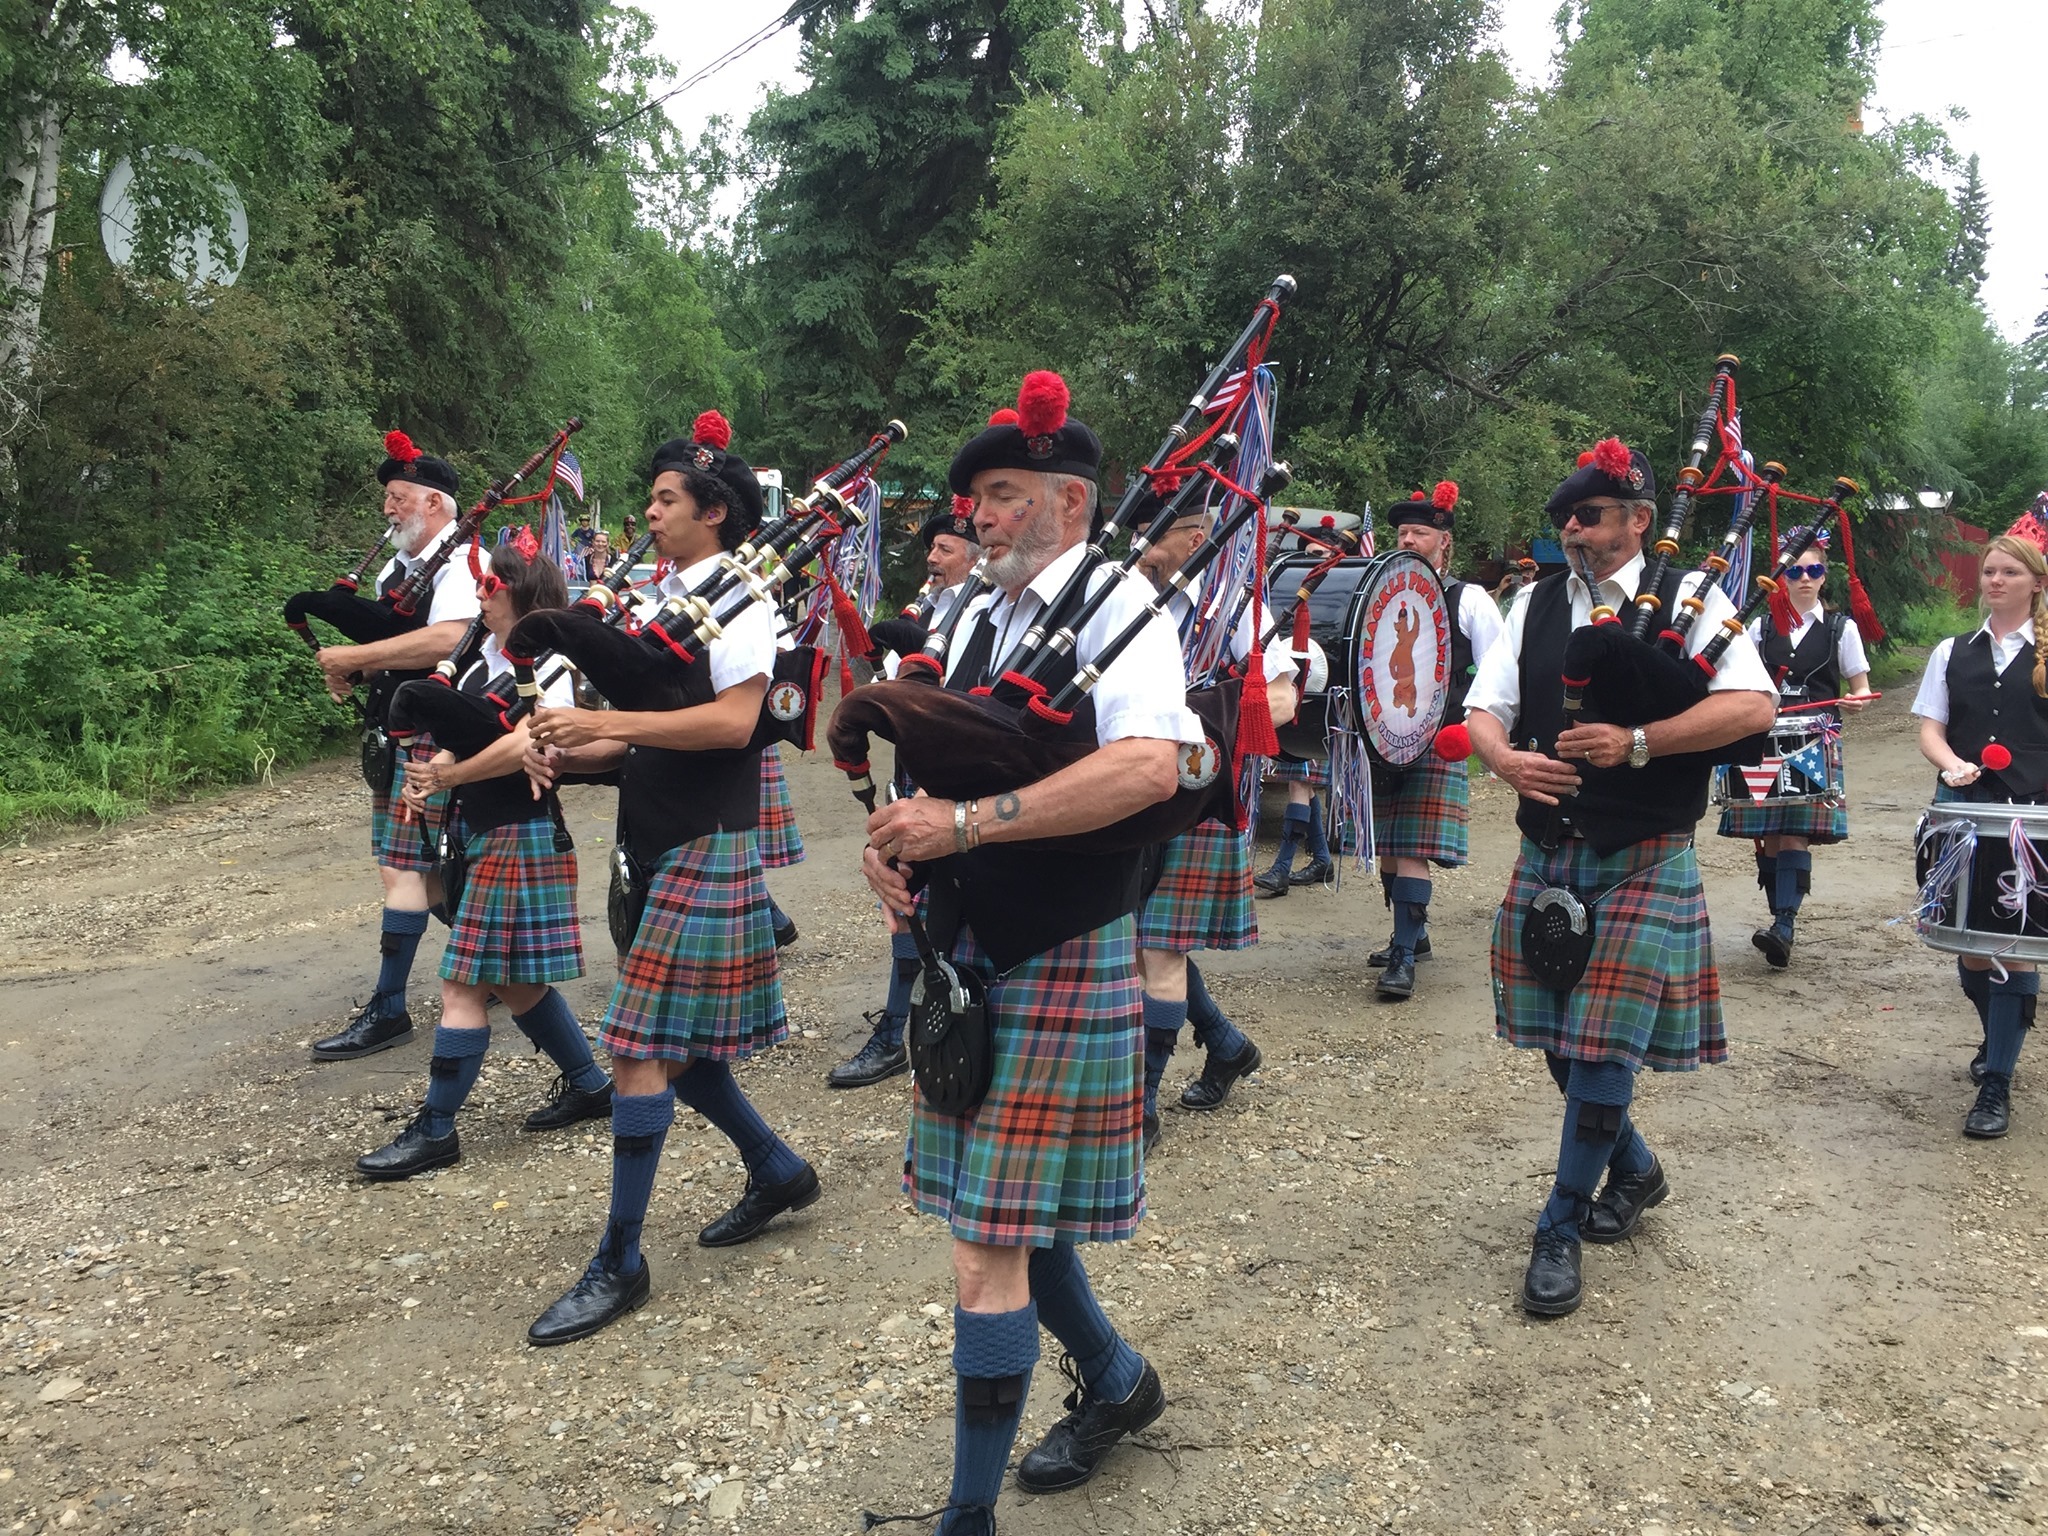 Bag pipers dressed in Scottish kilts playing in formation